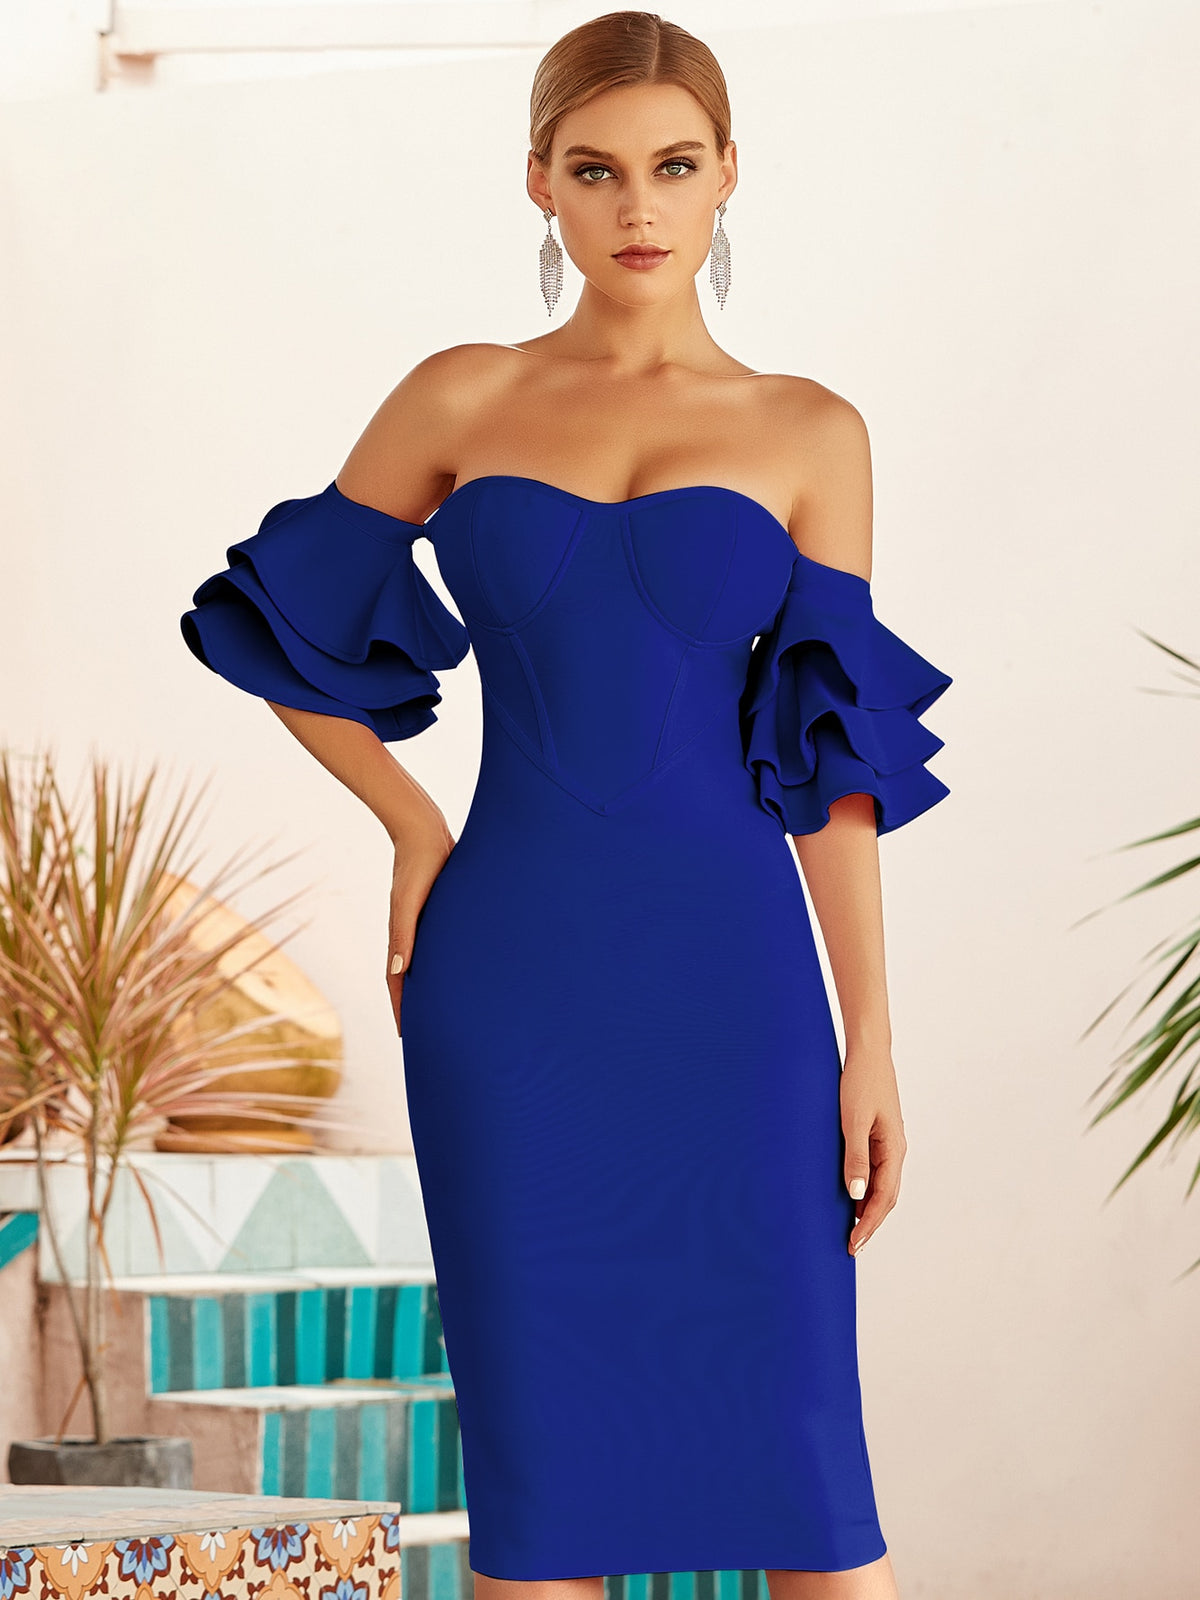 Adyce 2023 New Summer Women Blue Off Shoulder Bodycon Bandage Dress Sexy Butterfly Short Sleeve Hot Celebrity Runway Party Dress